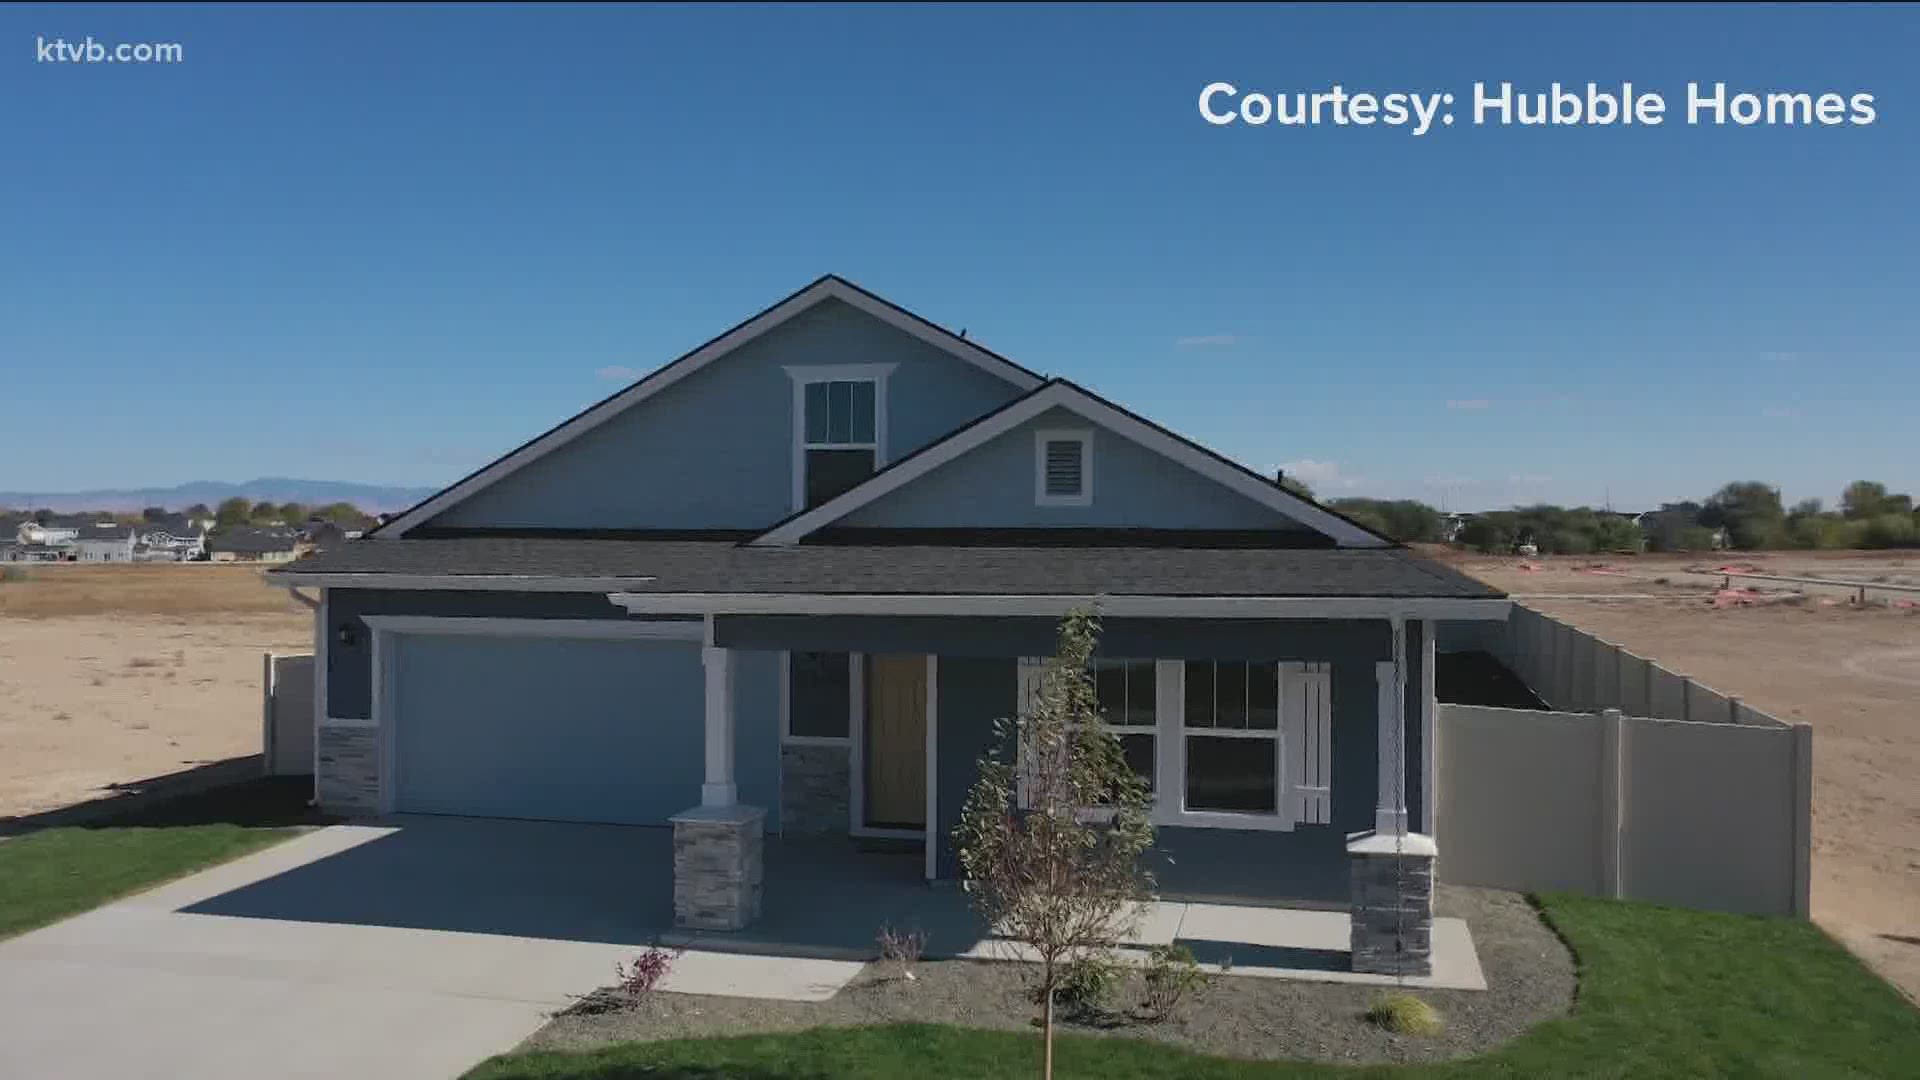 The four-bedroom, two-bath home is on sale now in Nampa.